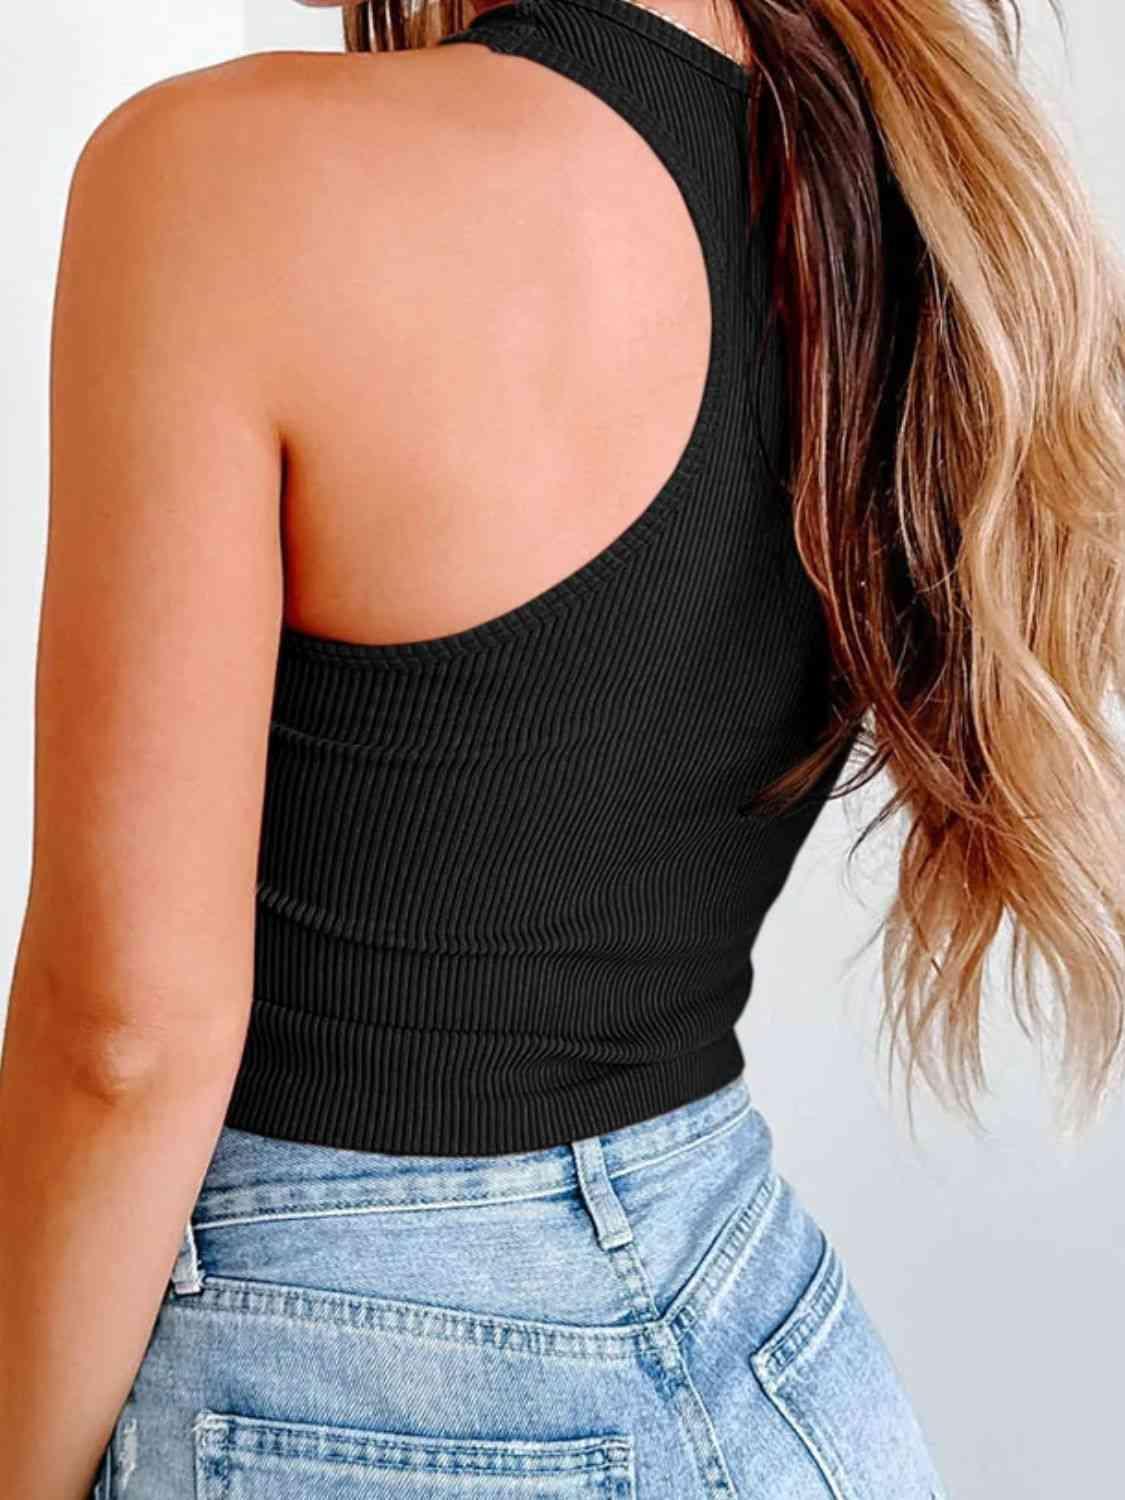 a woman with long hair wearing a black top